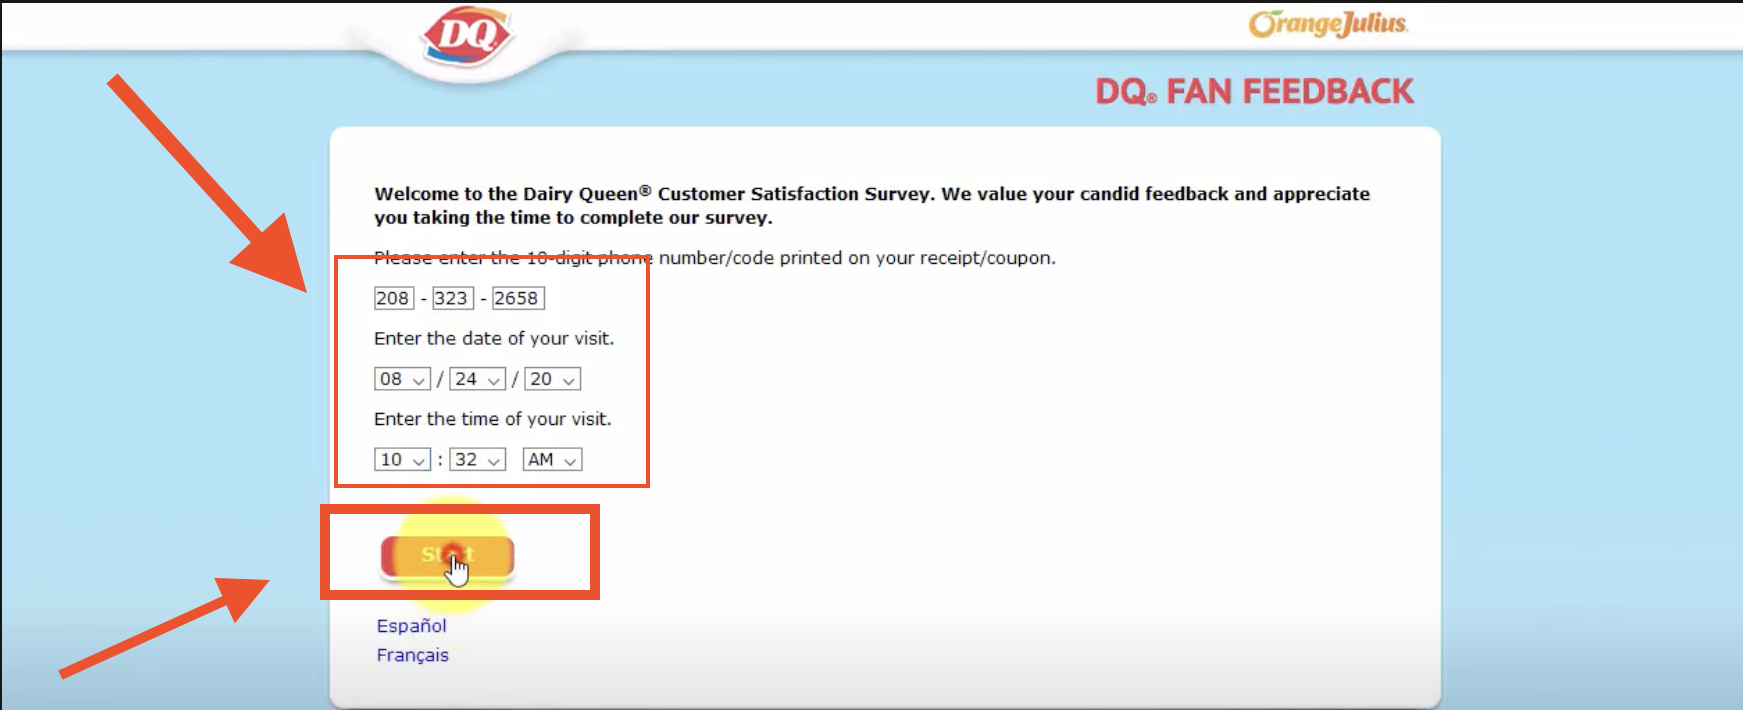 How To Take The Online DQfanfeedback Survey 